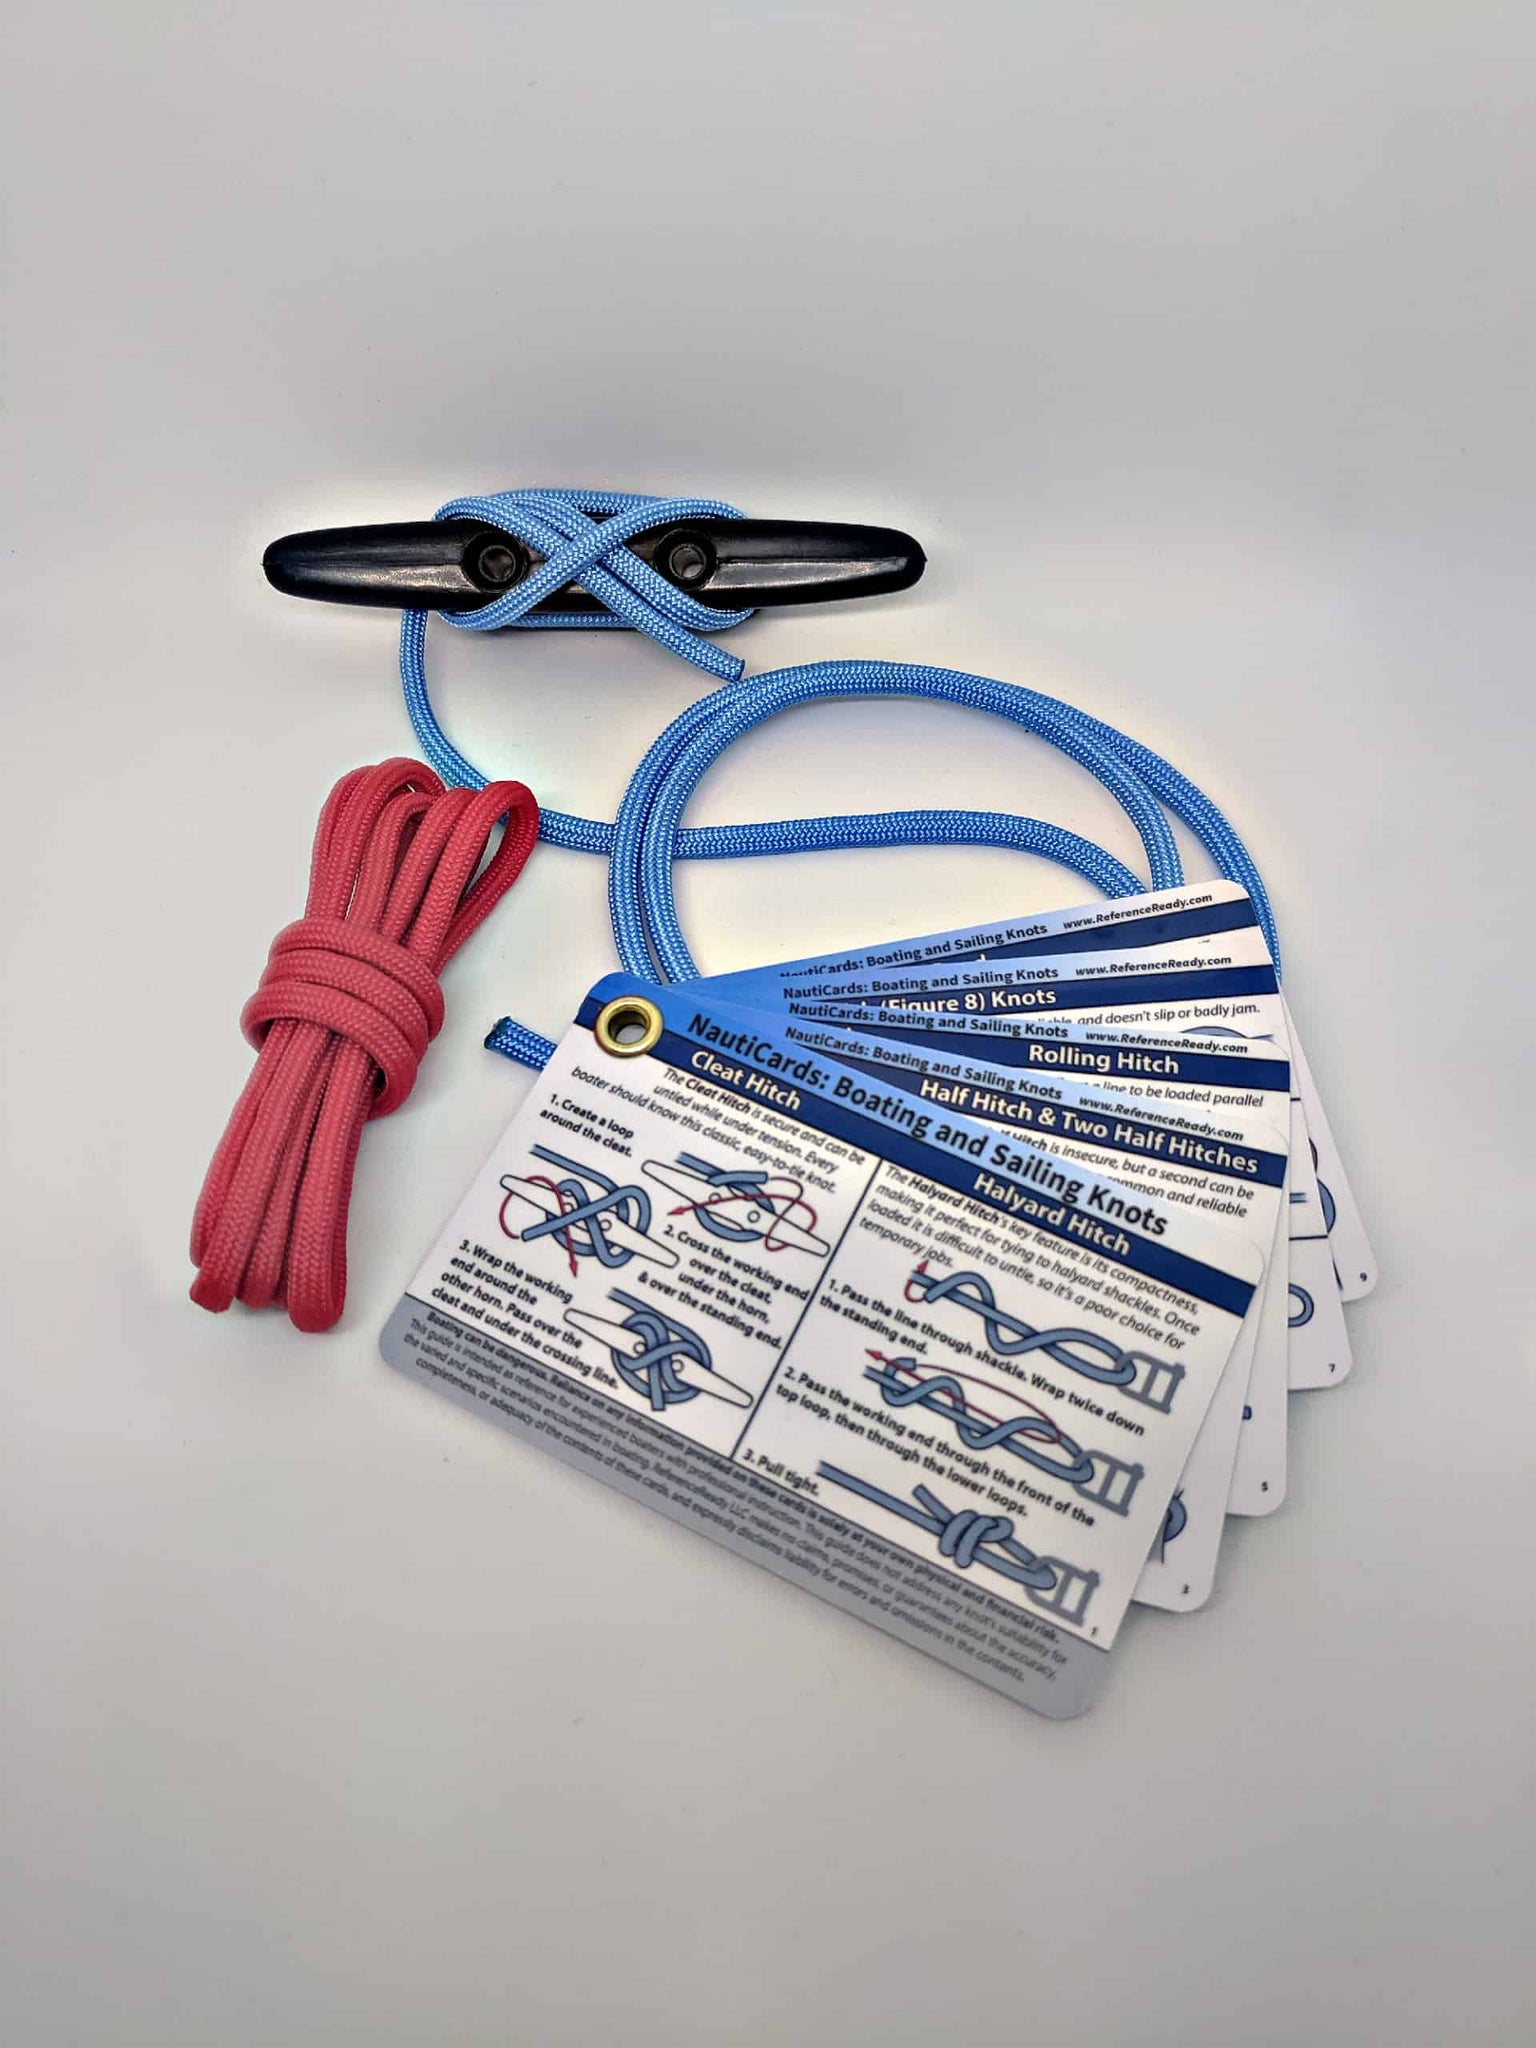 Nautical Knot Tying Kit - Includes Knot Guide, Cordage, and Horn